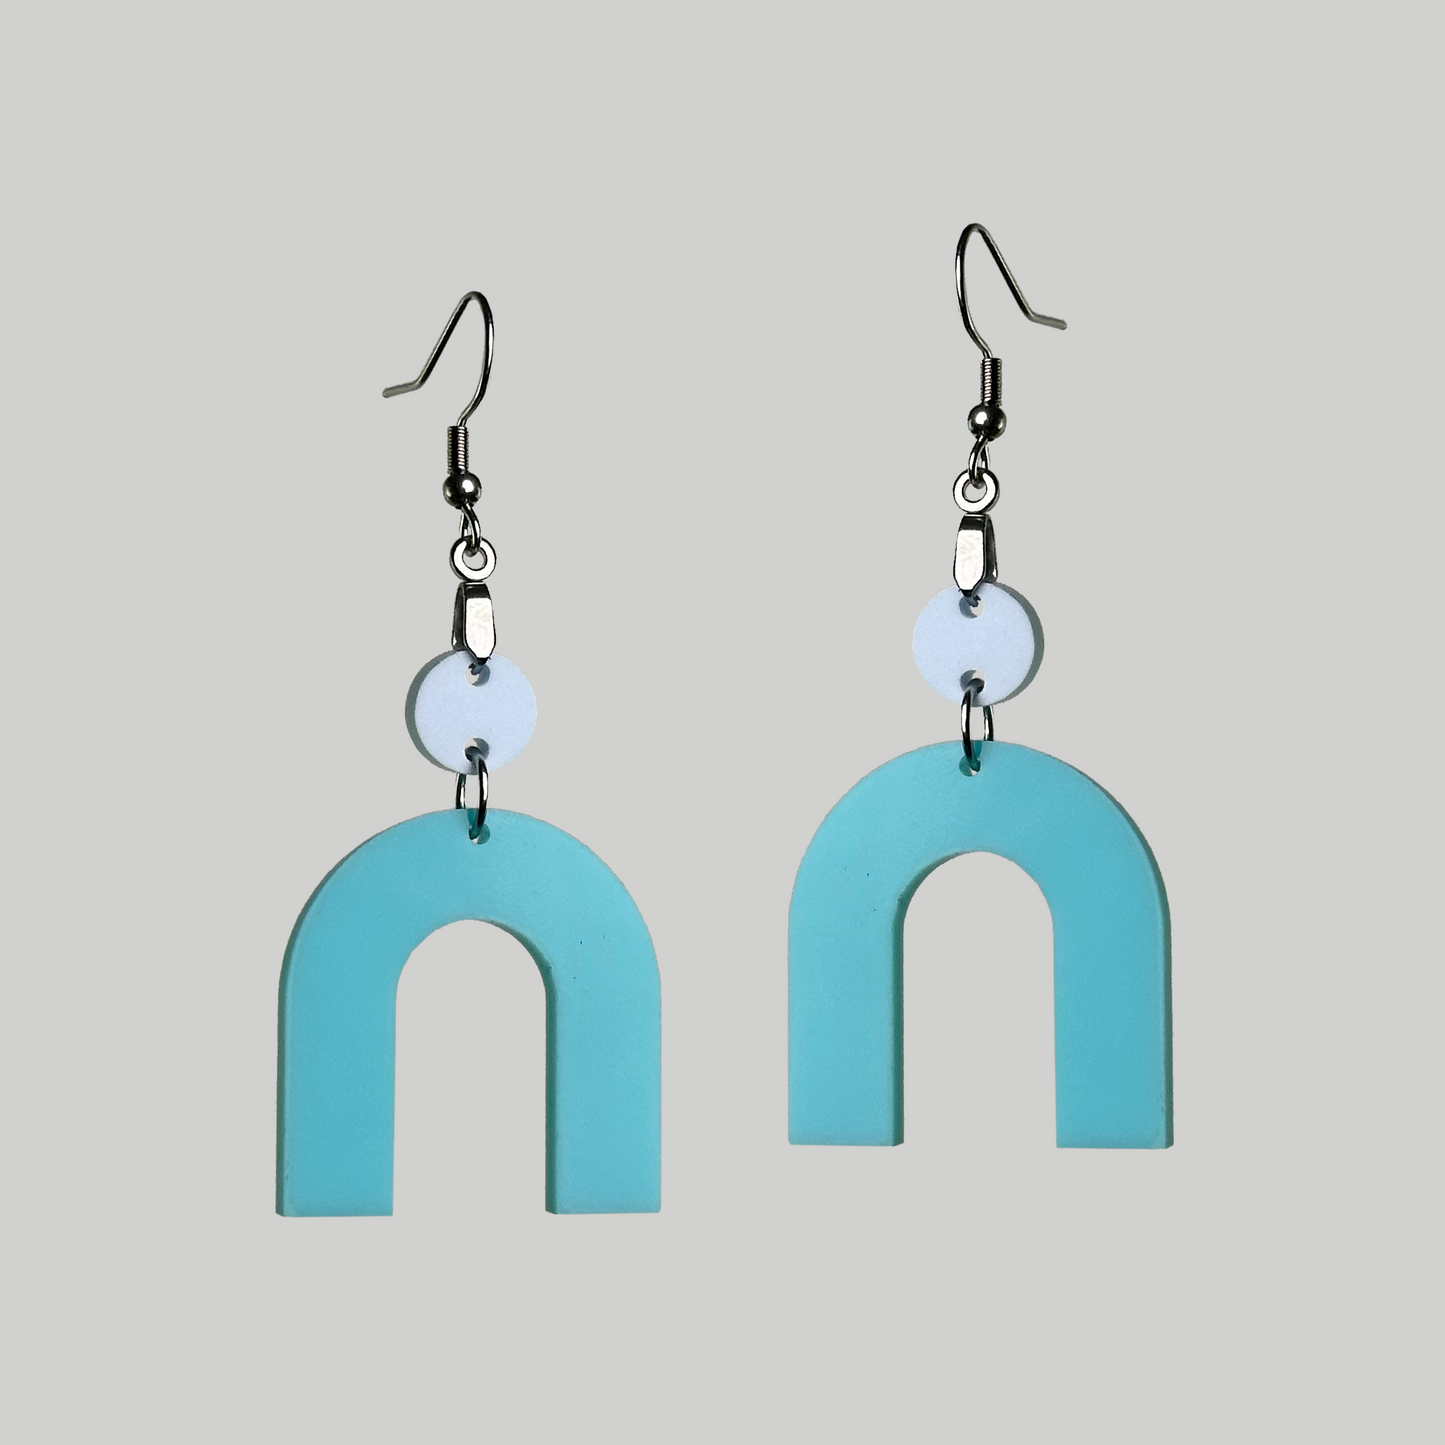 Arch-Shaped Earrings: Contemporary elegance in stylish arch-inspired accessories.